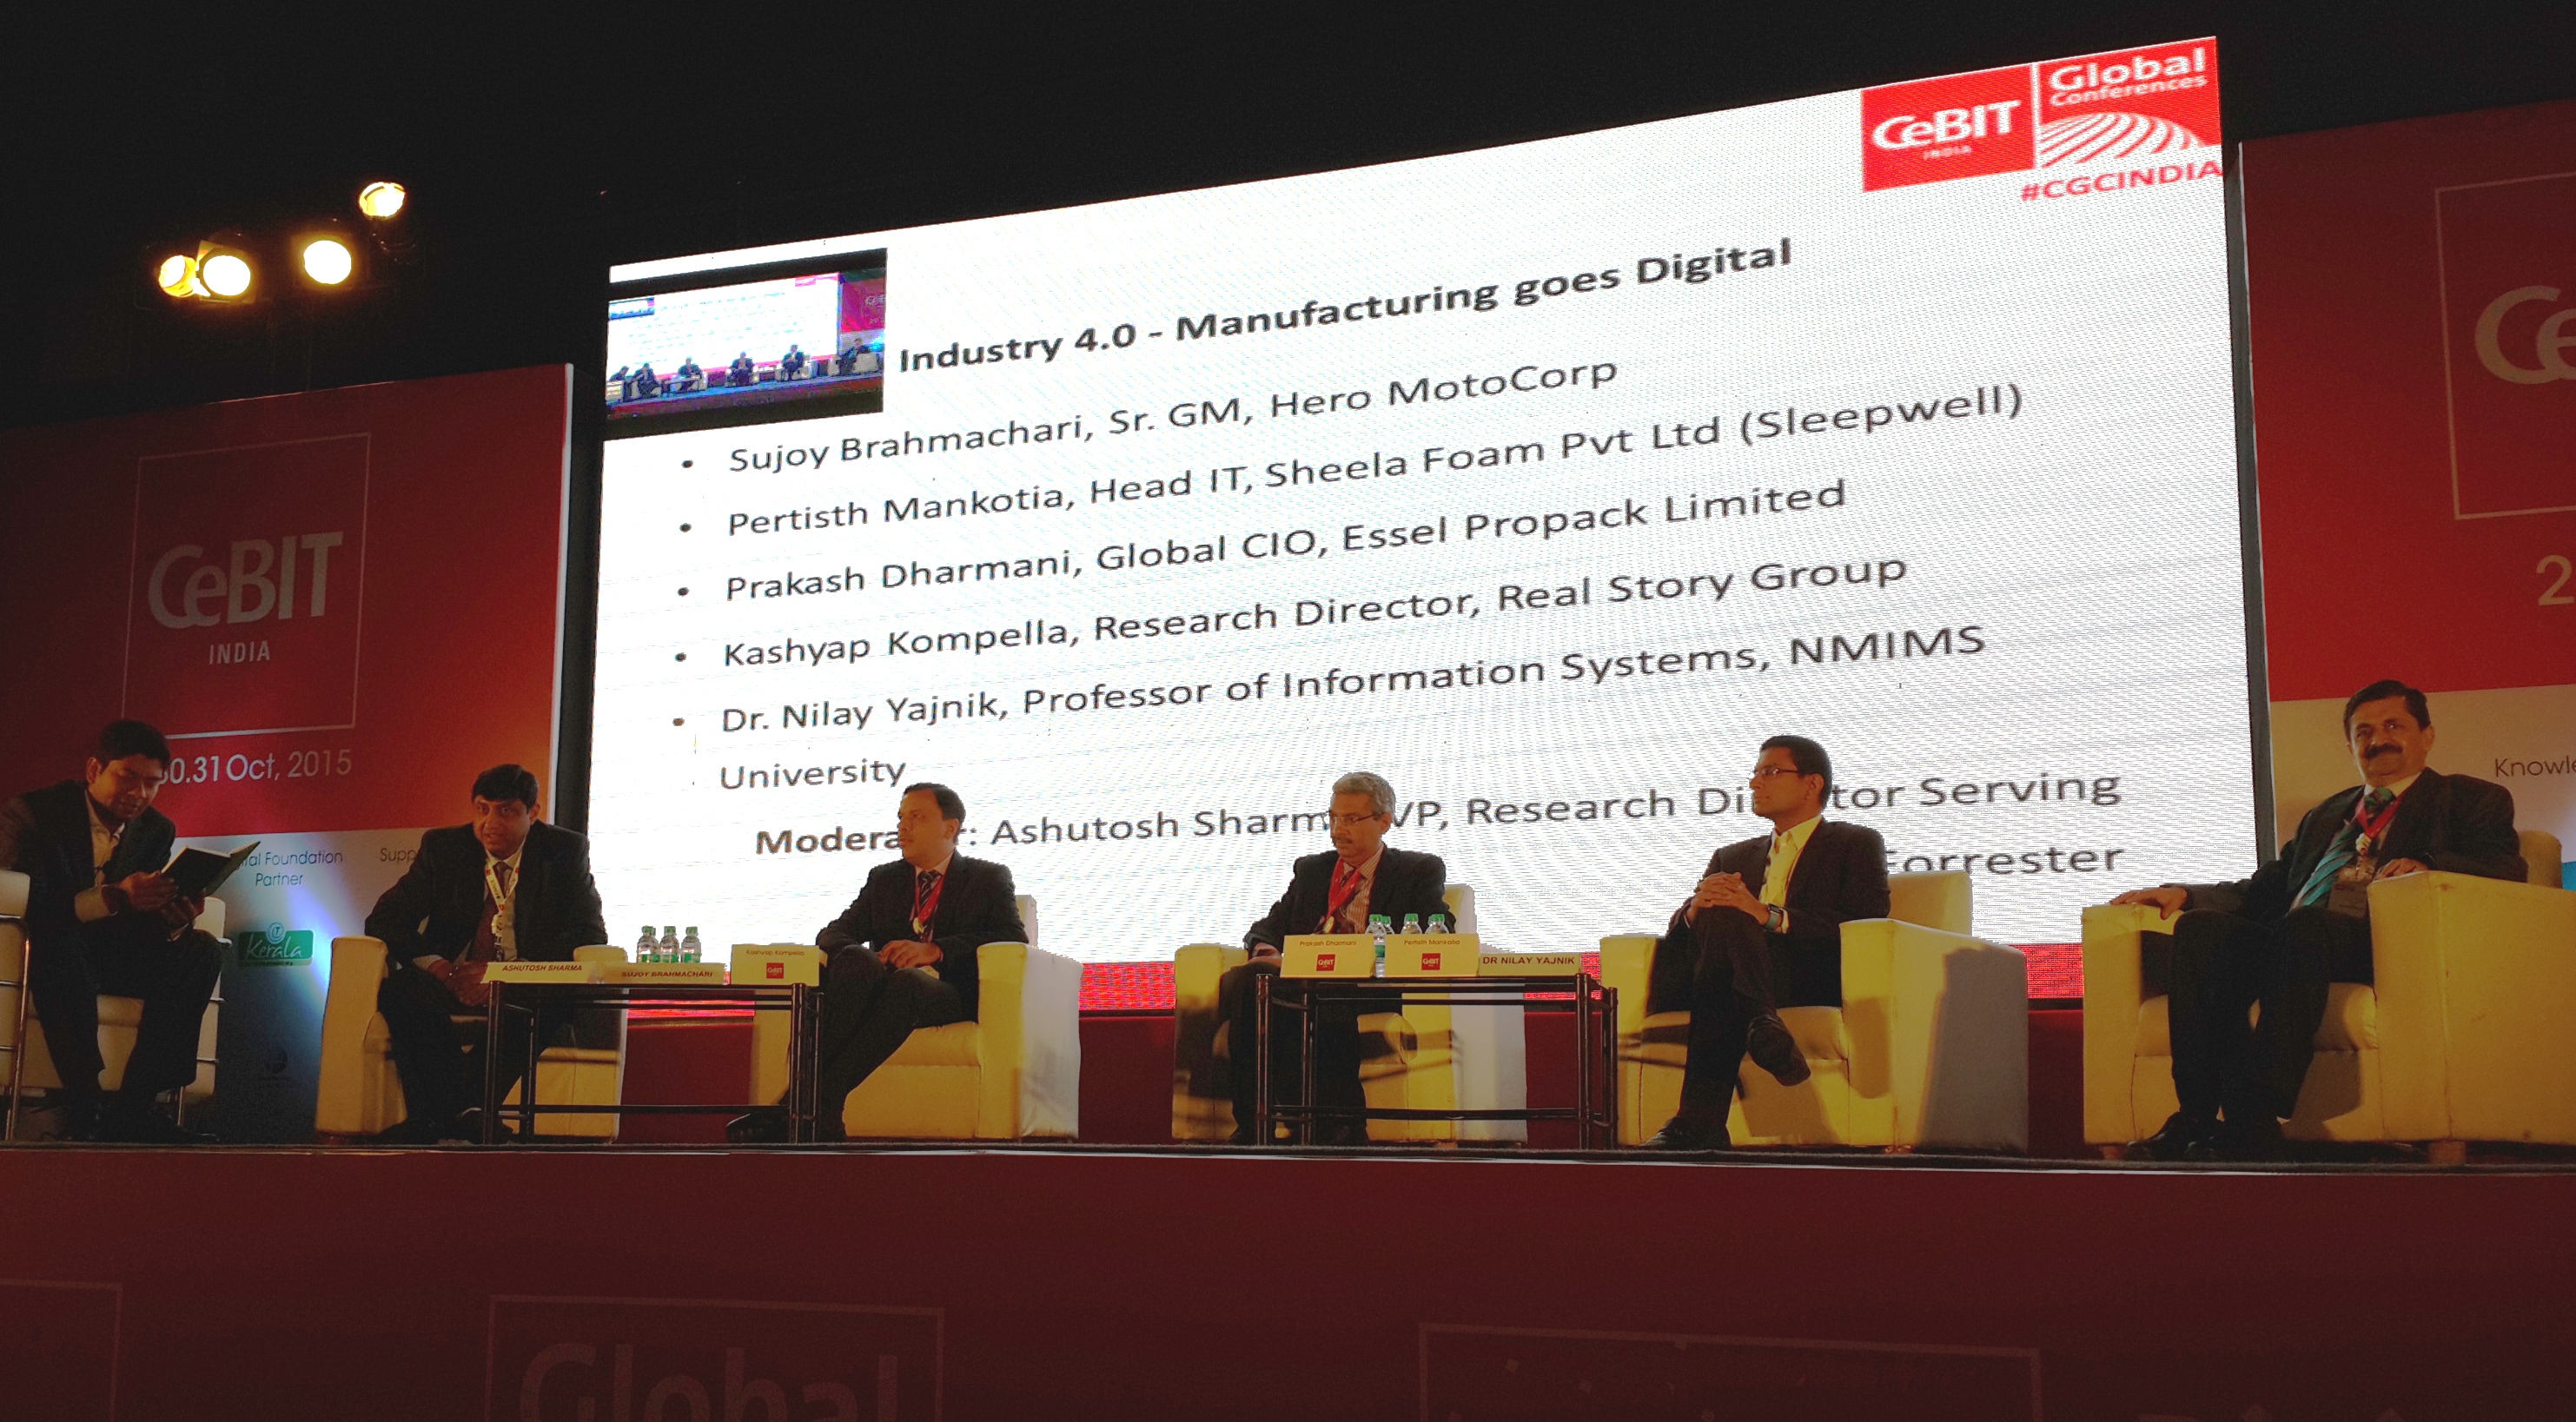 CeBIT panel concurs Services will be a differentiator for Manufacturing